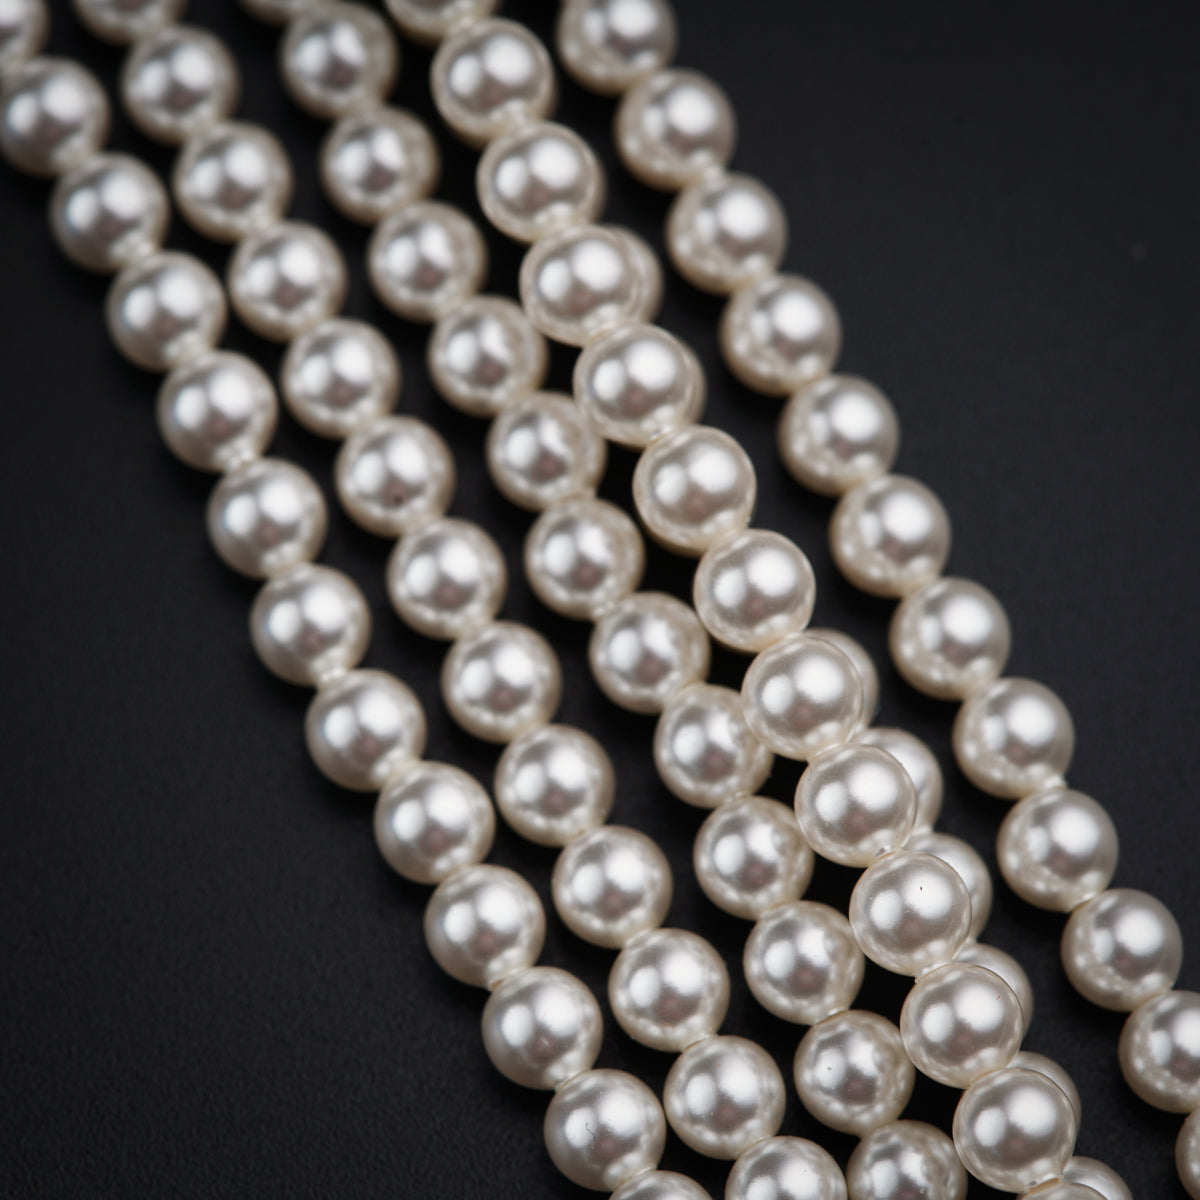 a close up of pearls on a black surface